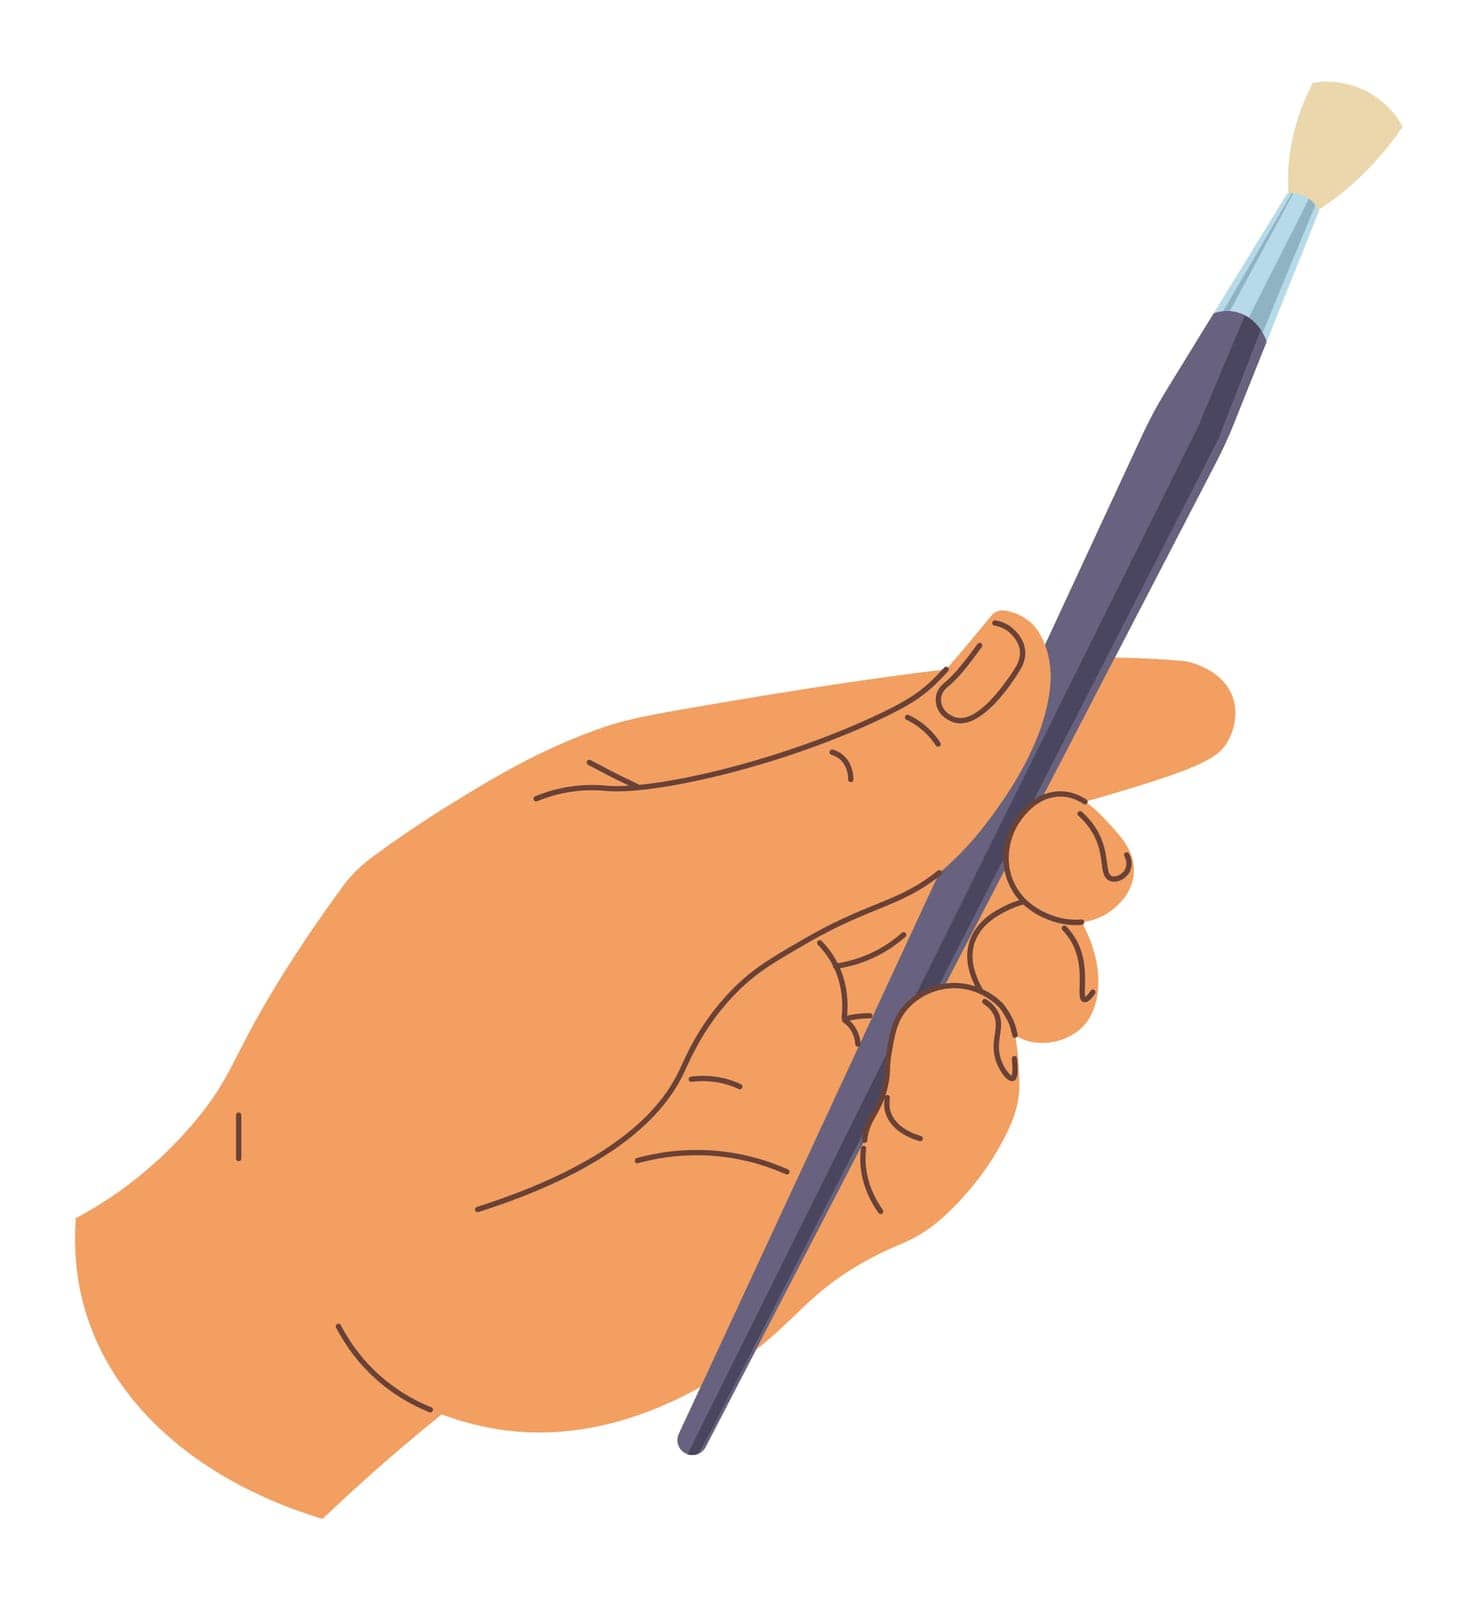 Painters and artists tools for creating drawings, isolated hand holding paintbrush with wooden handle and quality bristle. Contemporary art school supplies, workshop or studio. Vector in flat style